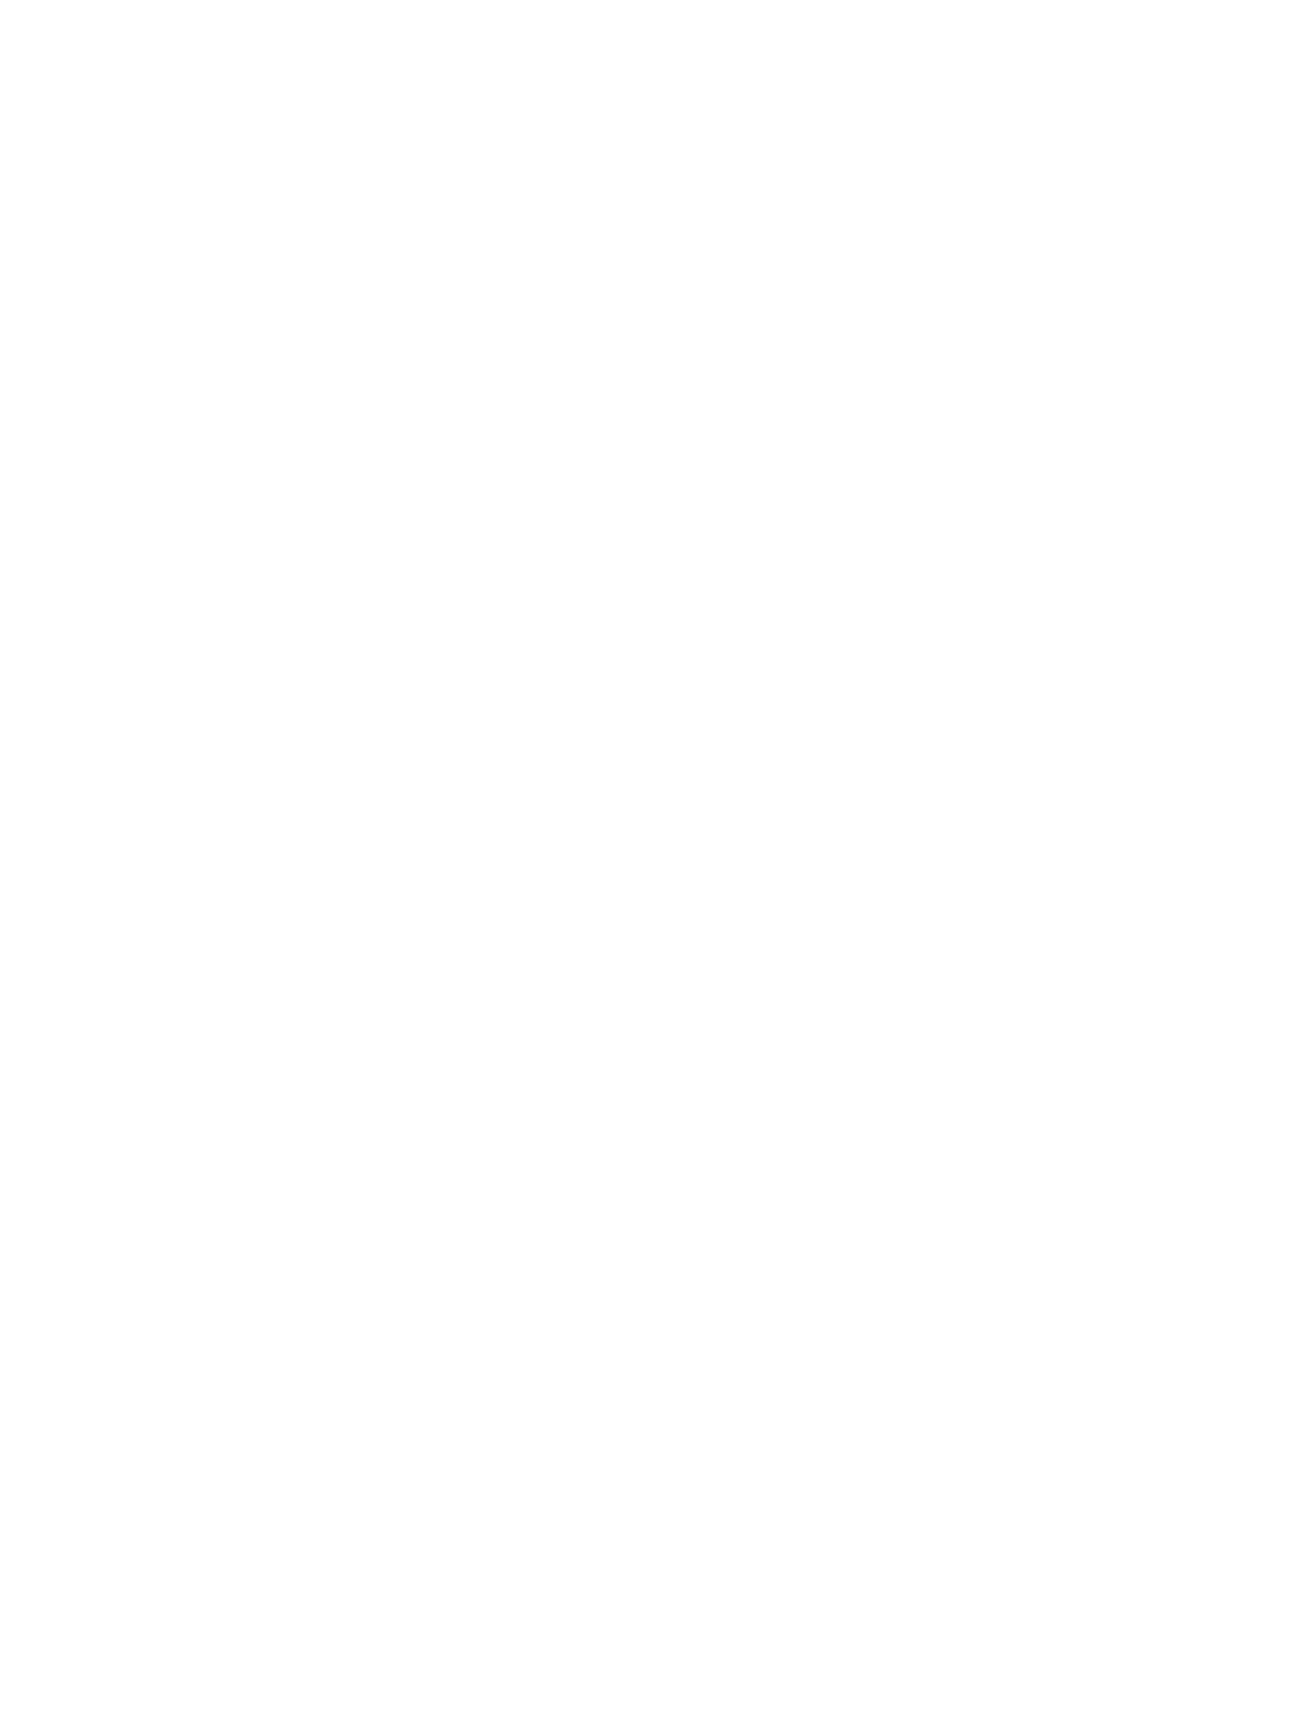 sia approved contractor logo white